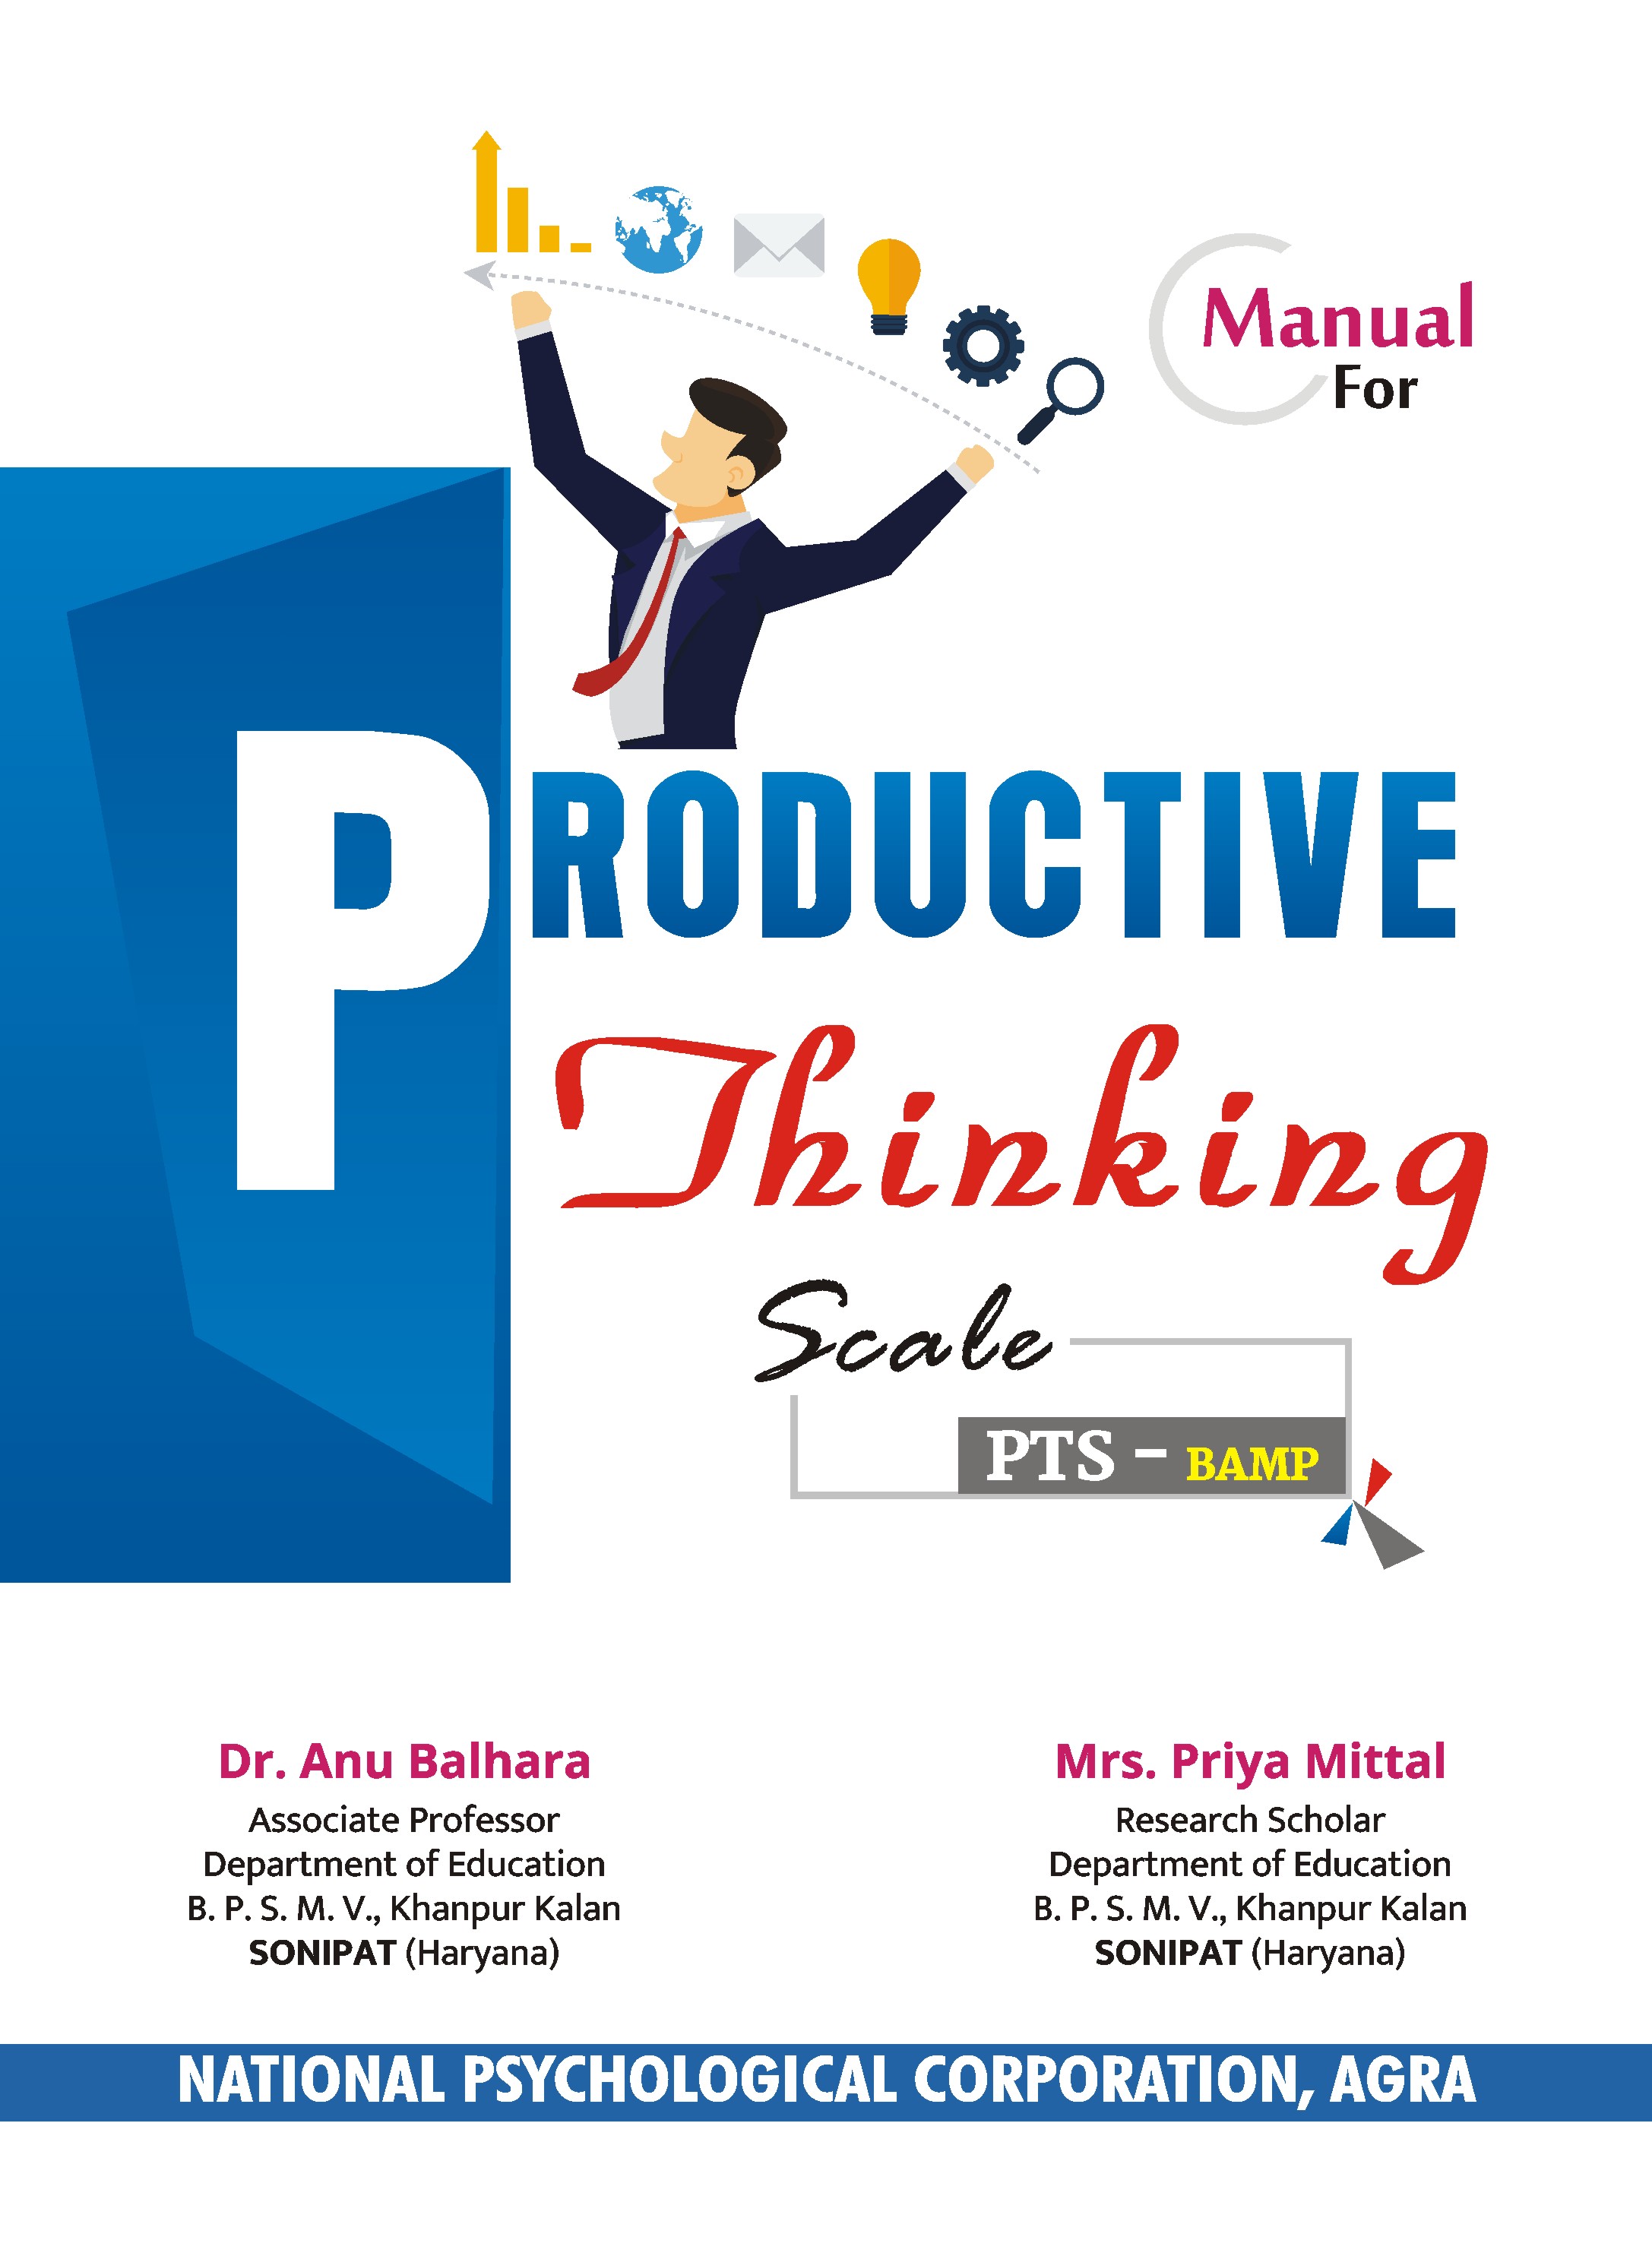 Productive-Thinking-Scale